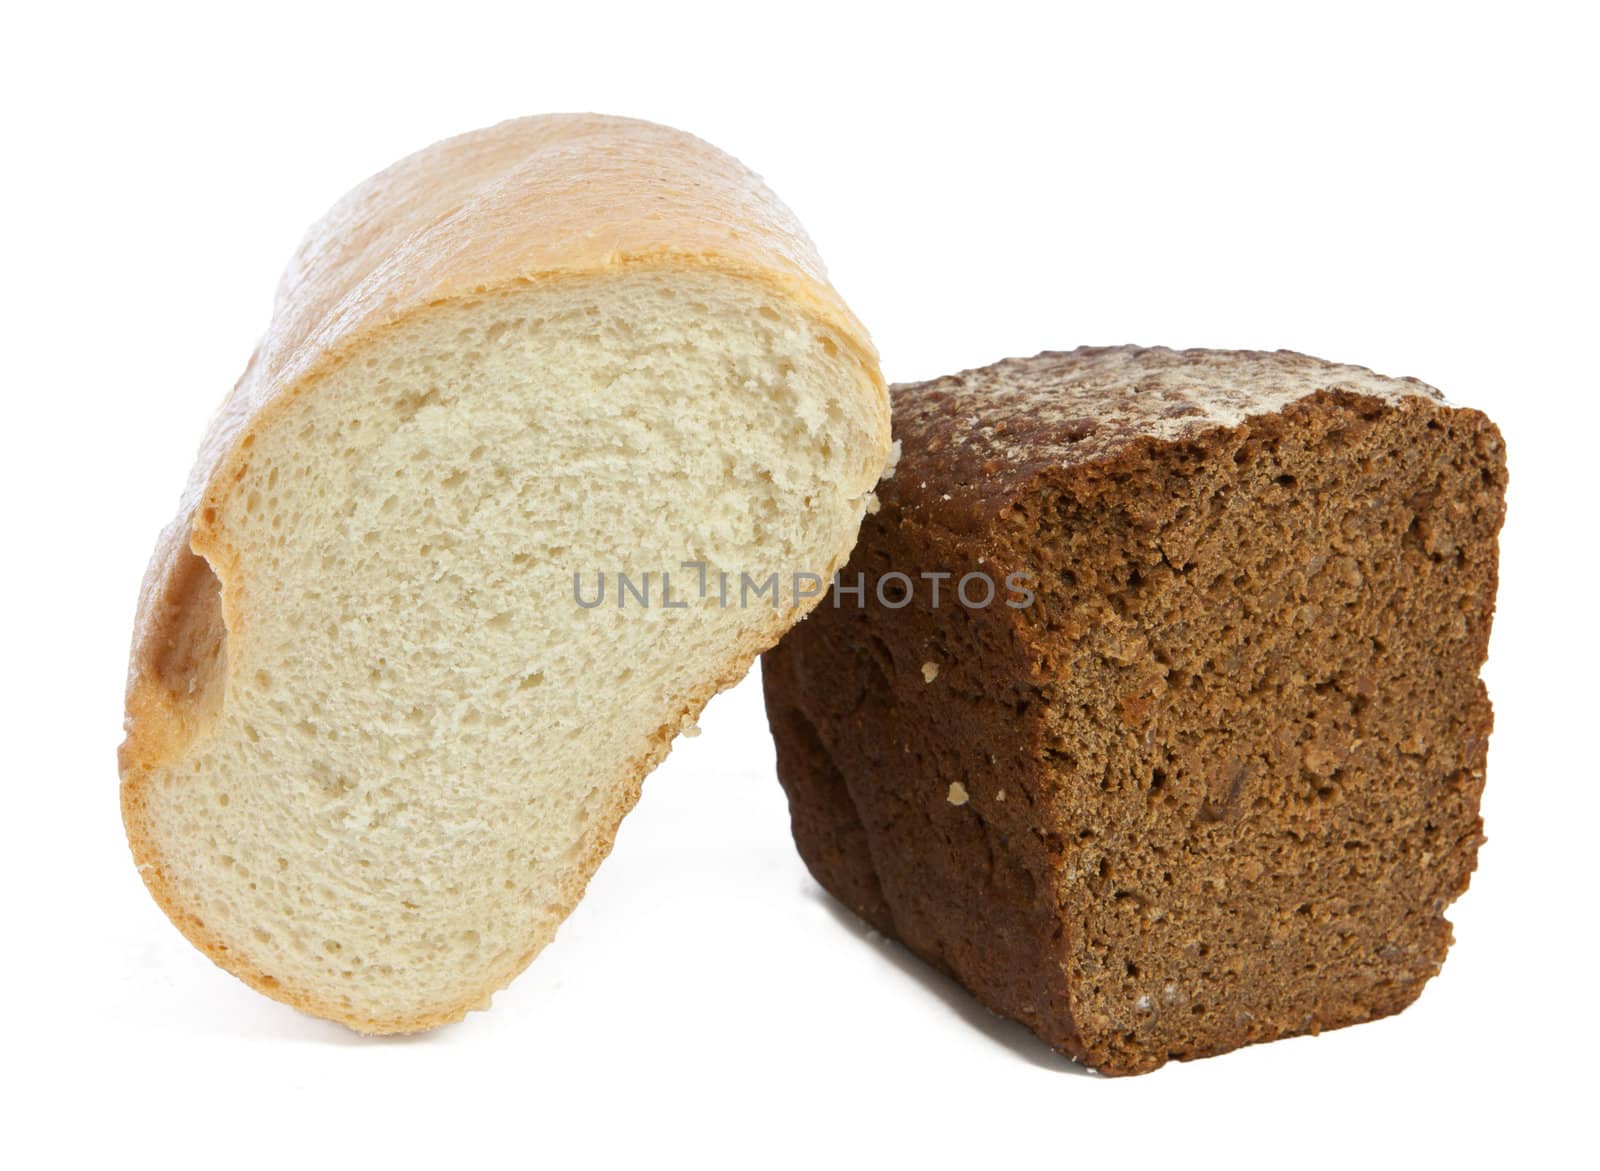 The bread isolated on the white background.